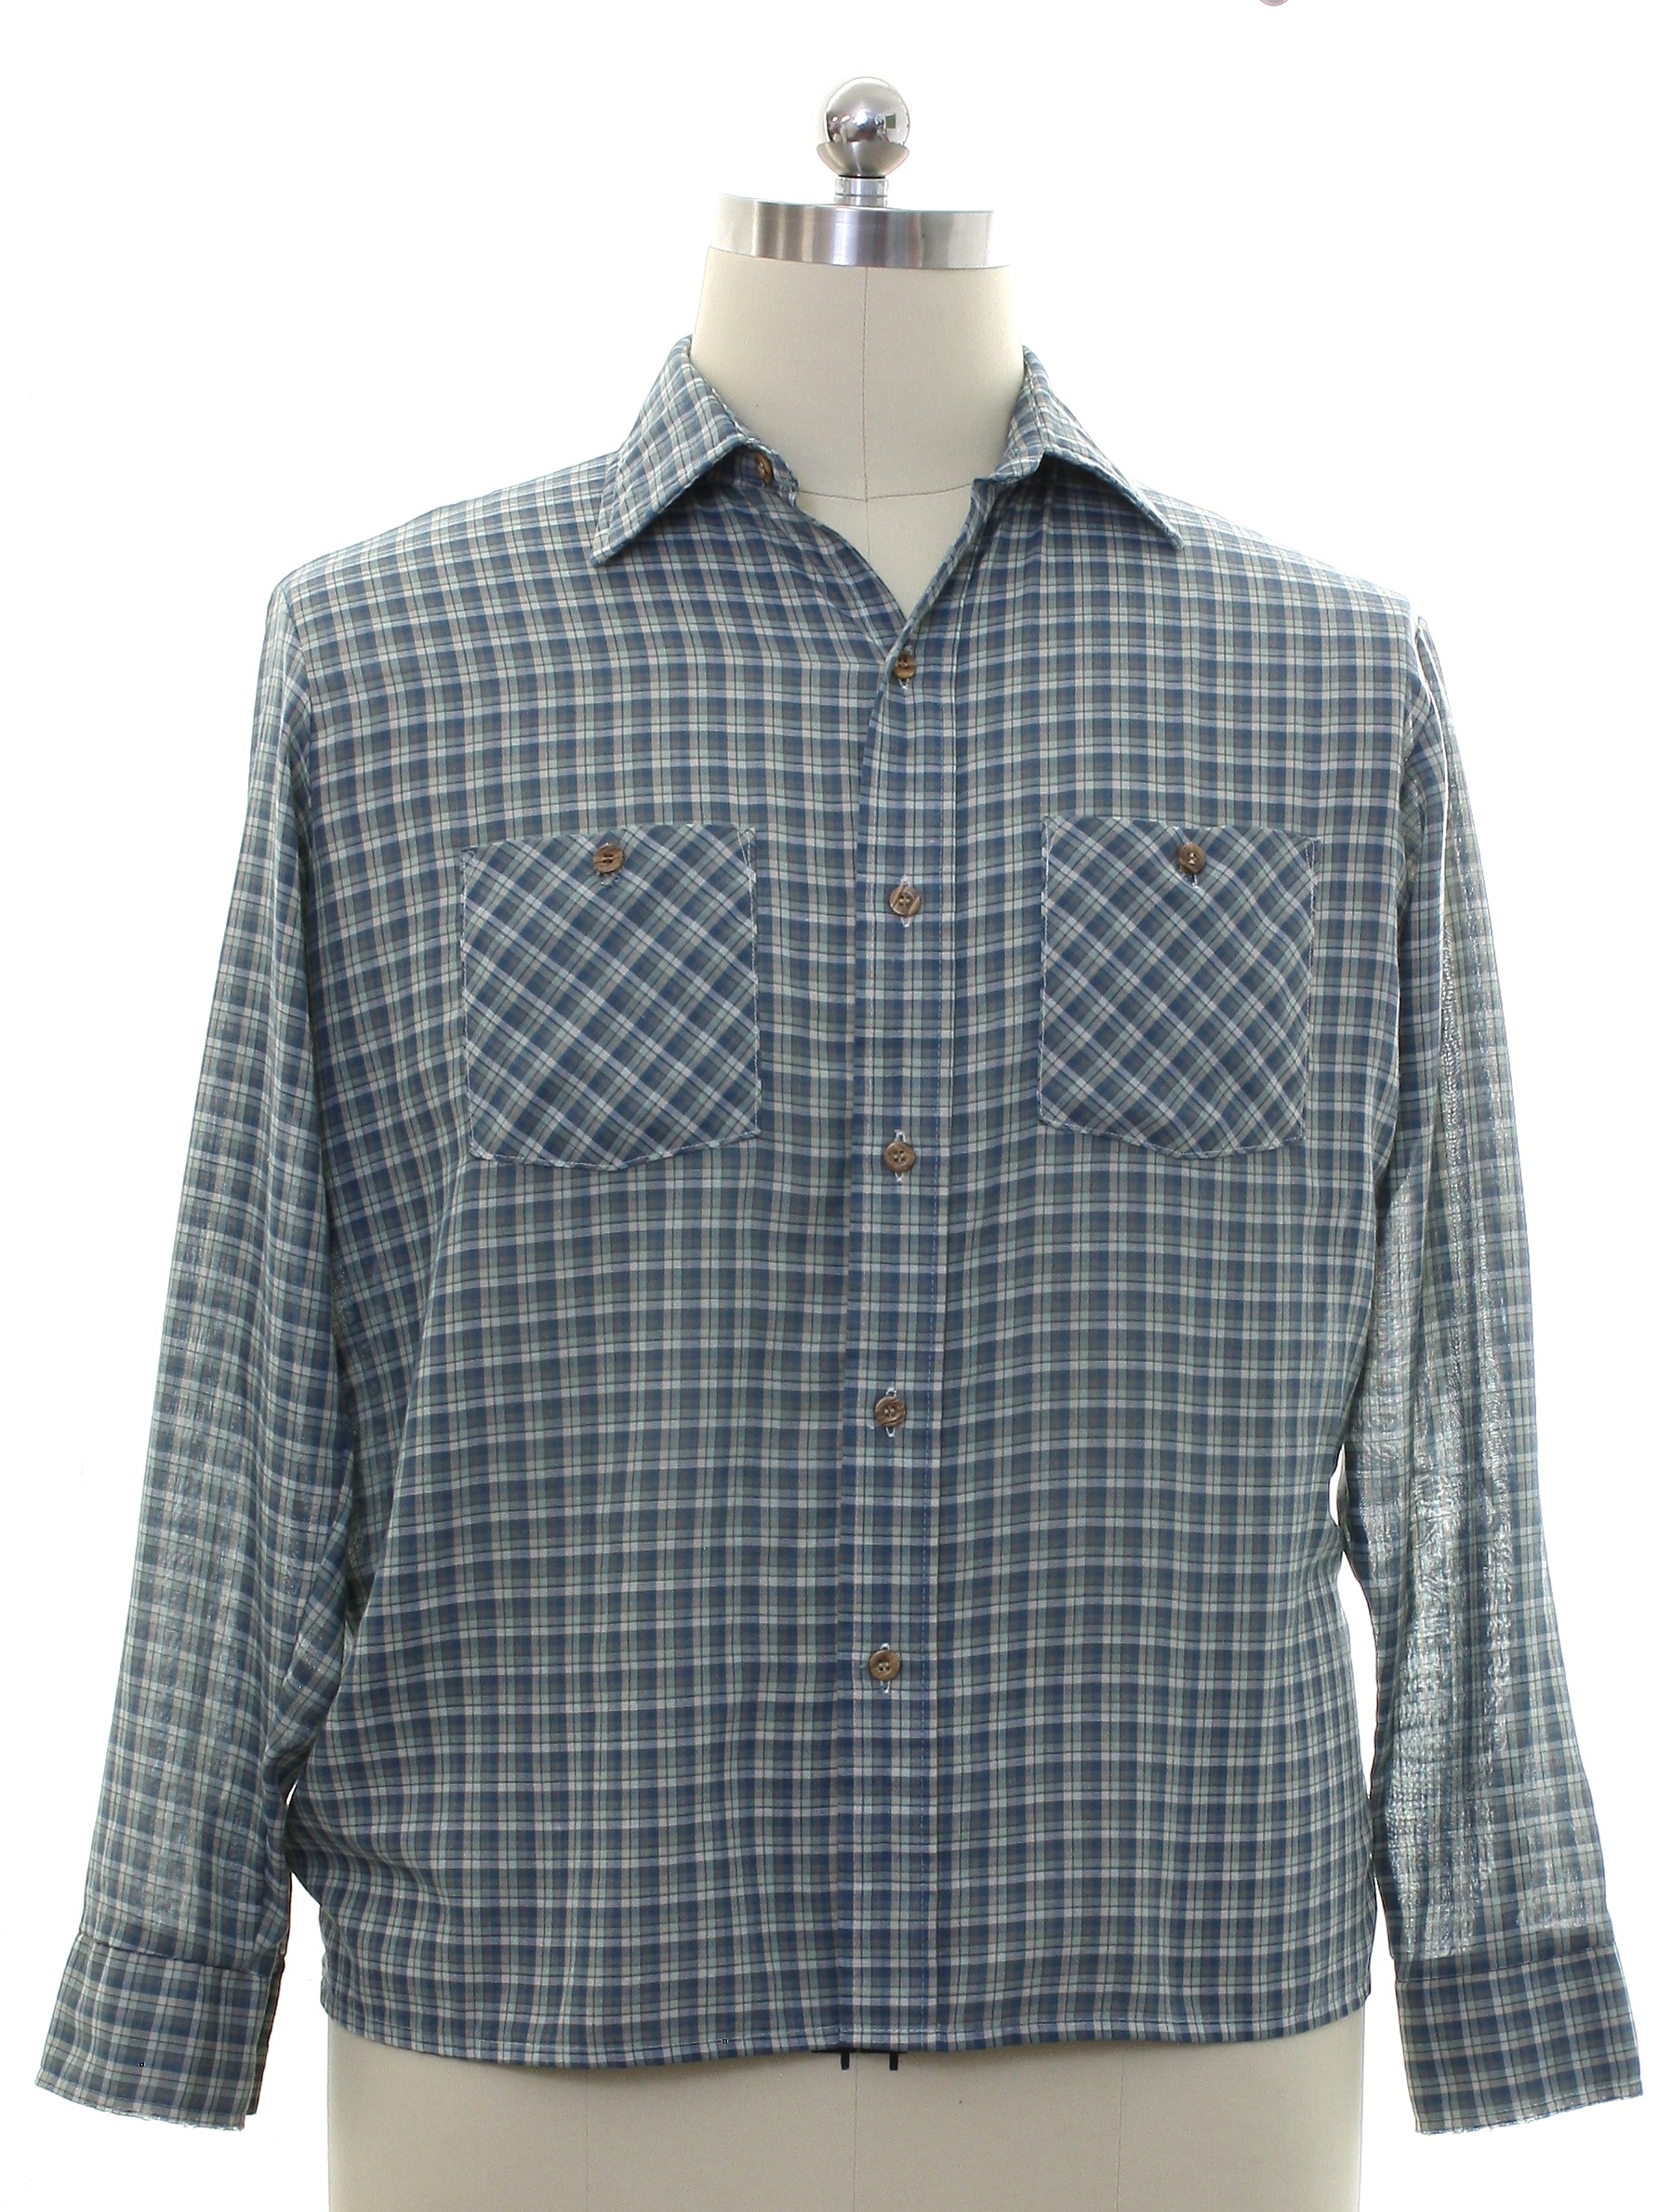 Vintage 1980's Shirt: Early 80s -Montgomery Ward- Mens dusty blue ...